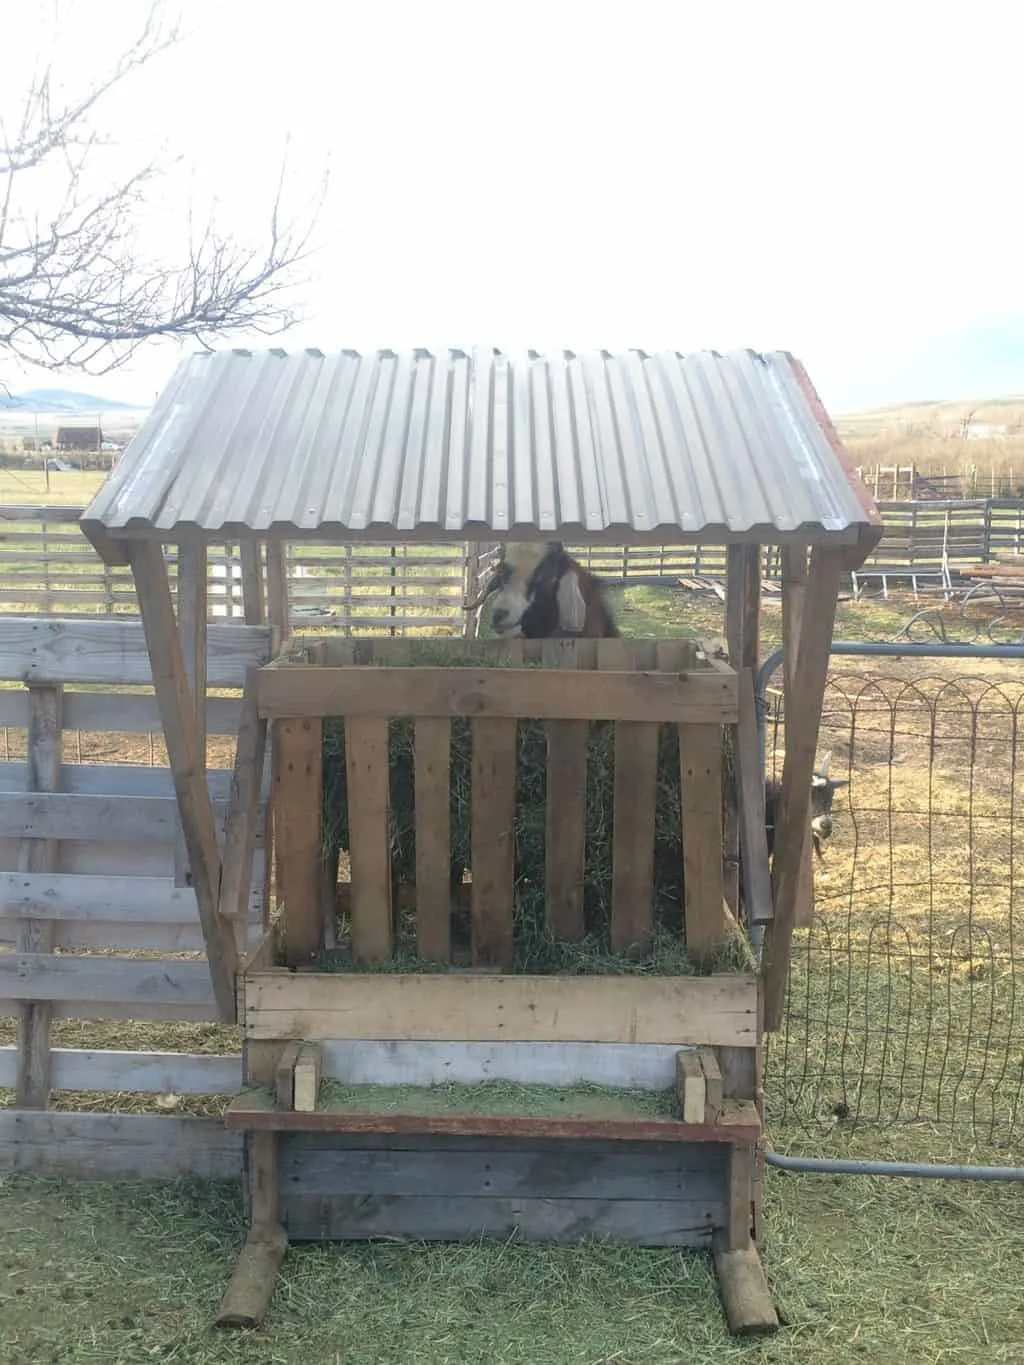 Goat feeder made out of pallets and old wood